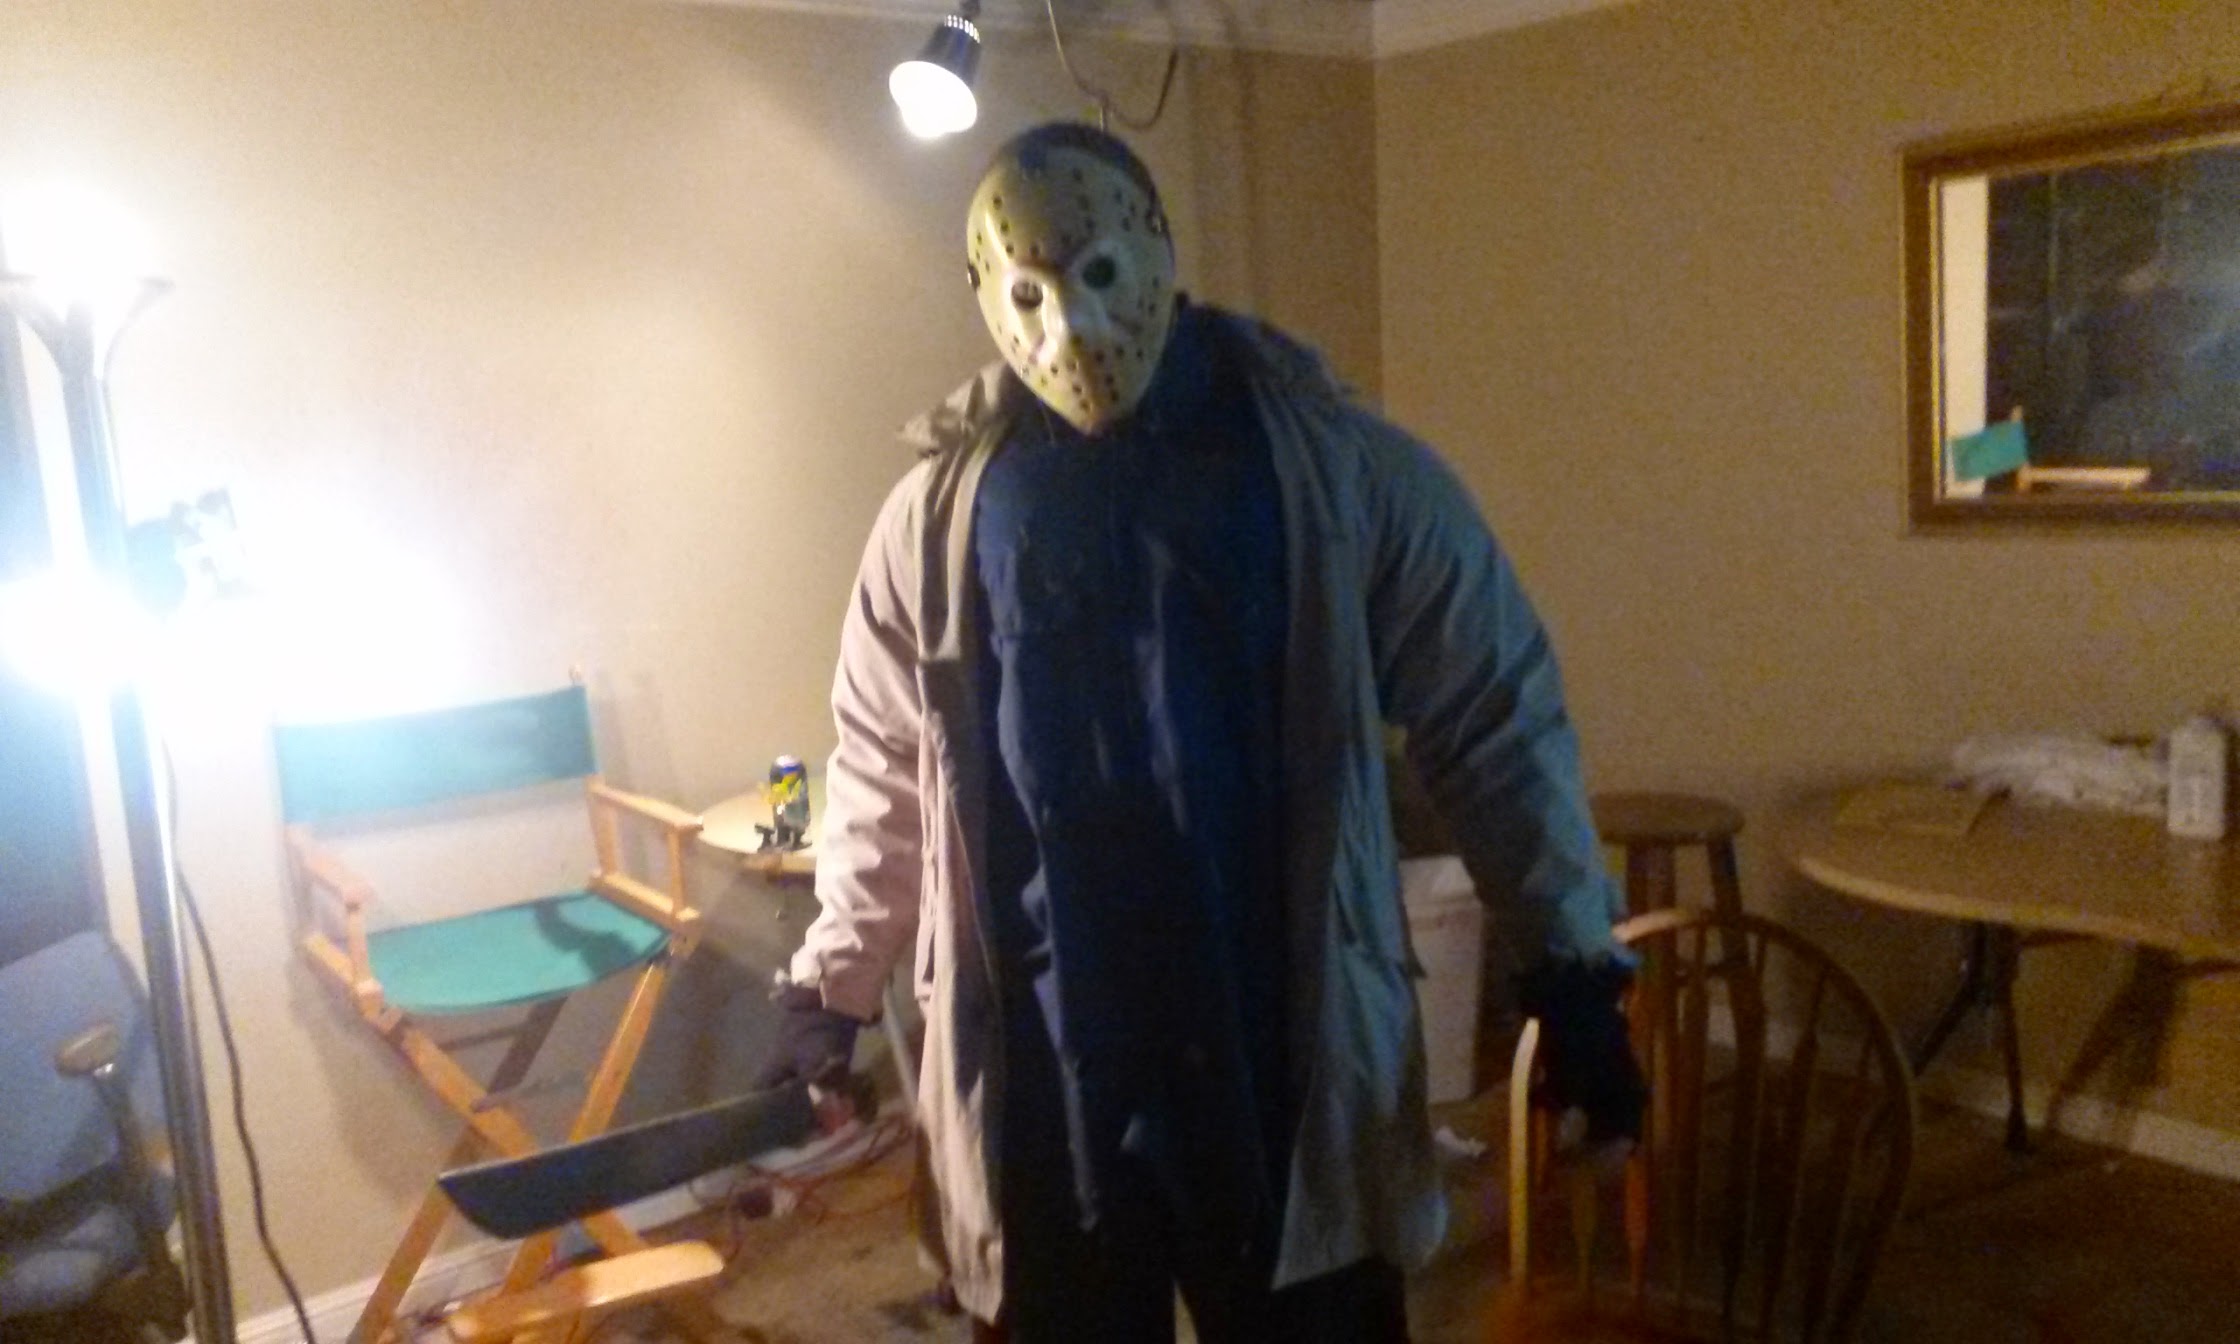 Played Jason Vorhees at Corbett's House of Horrors in October 2014.